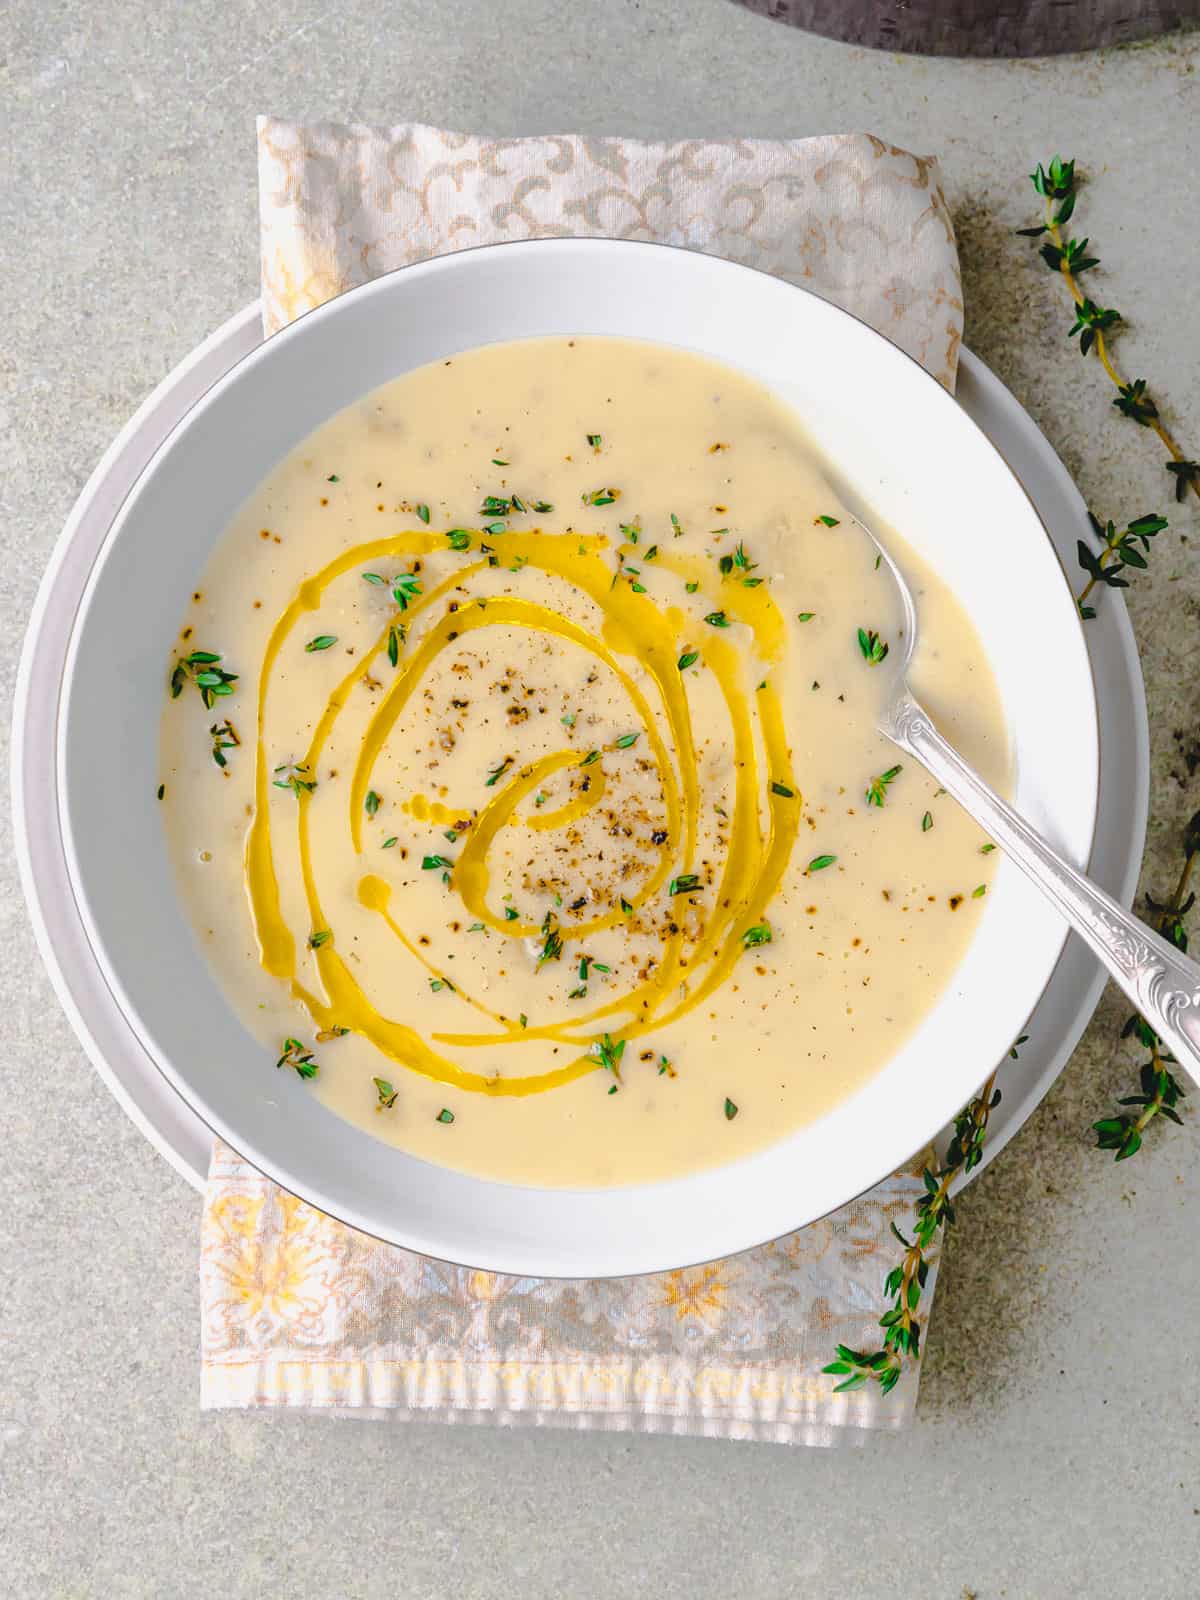 Creamy potato leek soup topped with fresh thyme and a drizzle of olive oil.